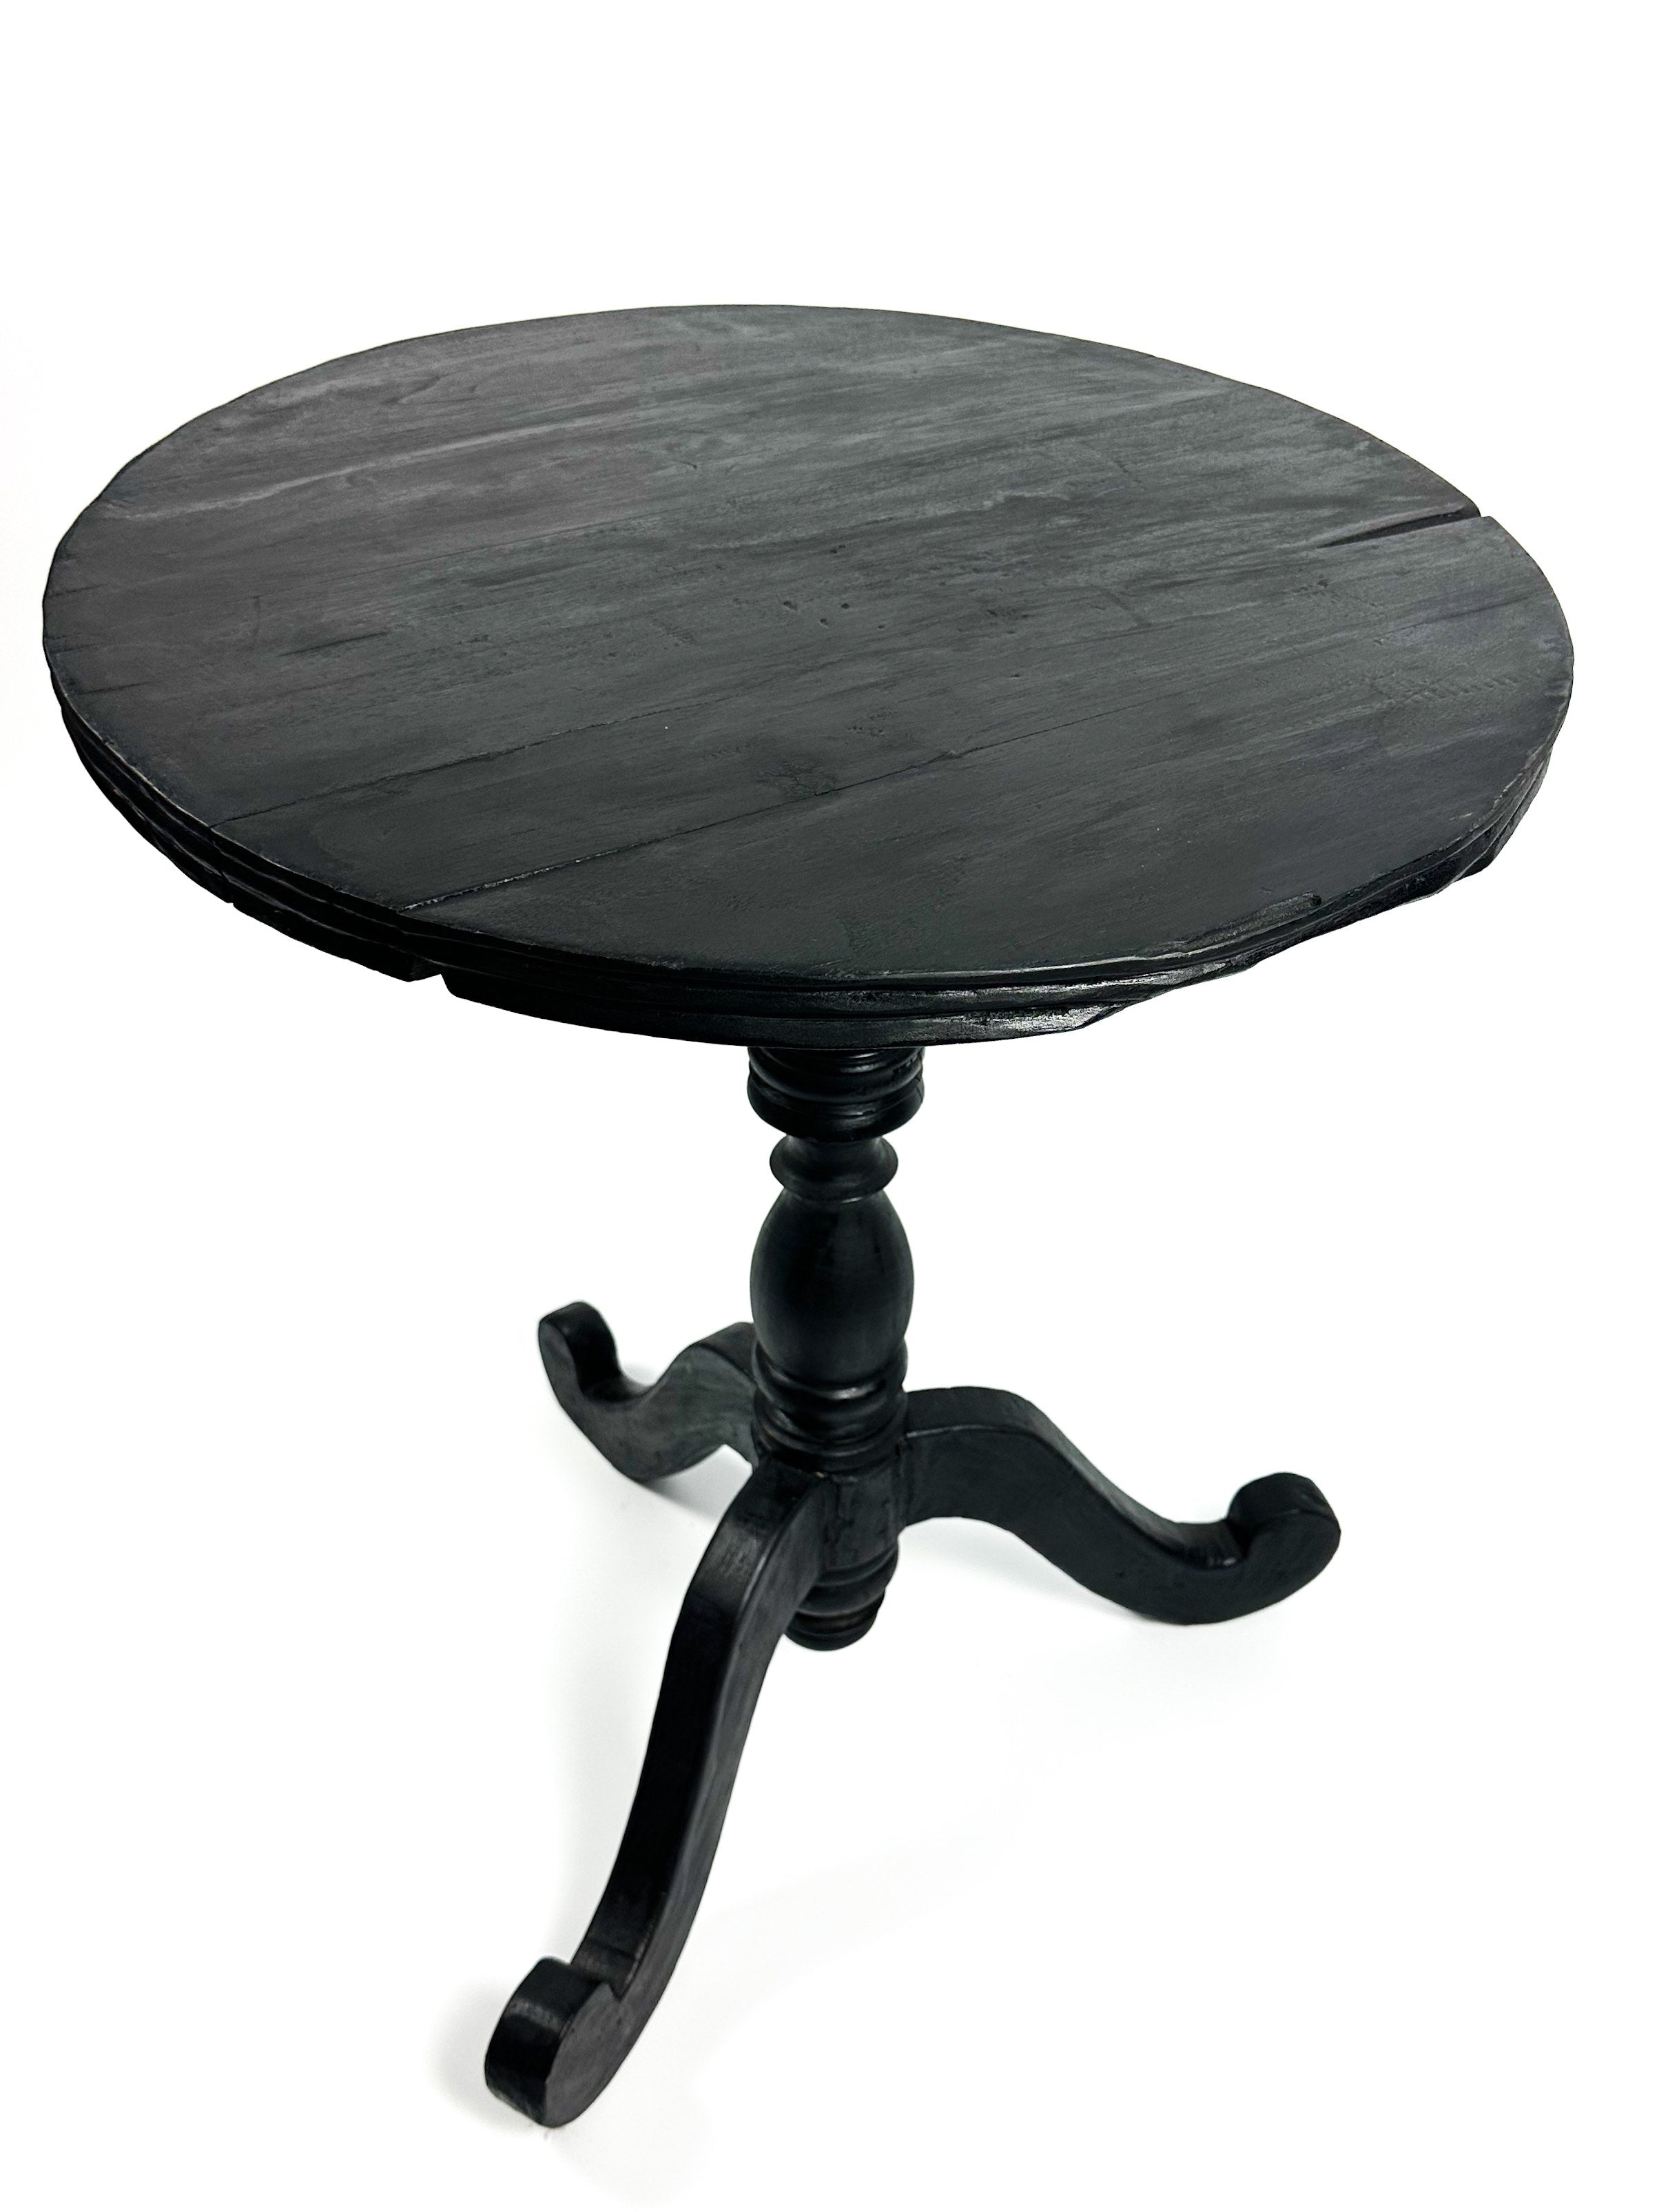 The black colonial table